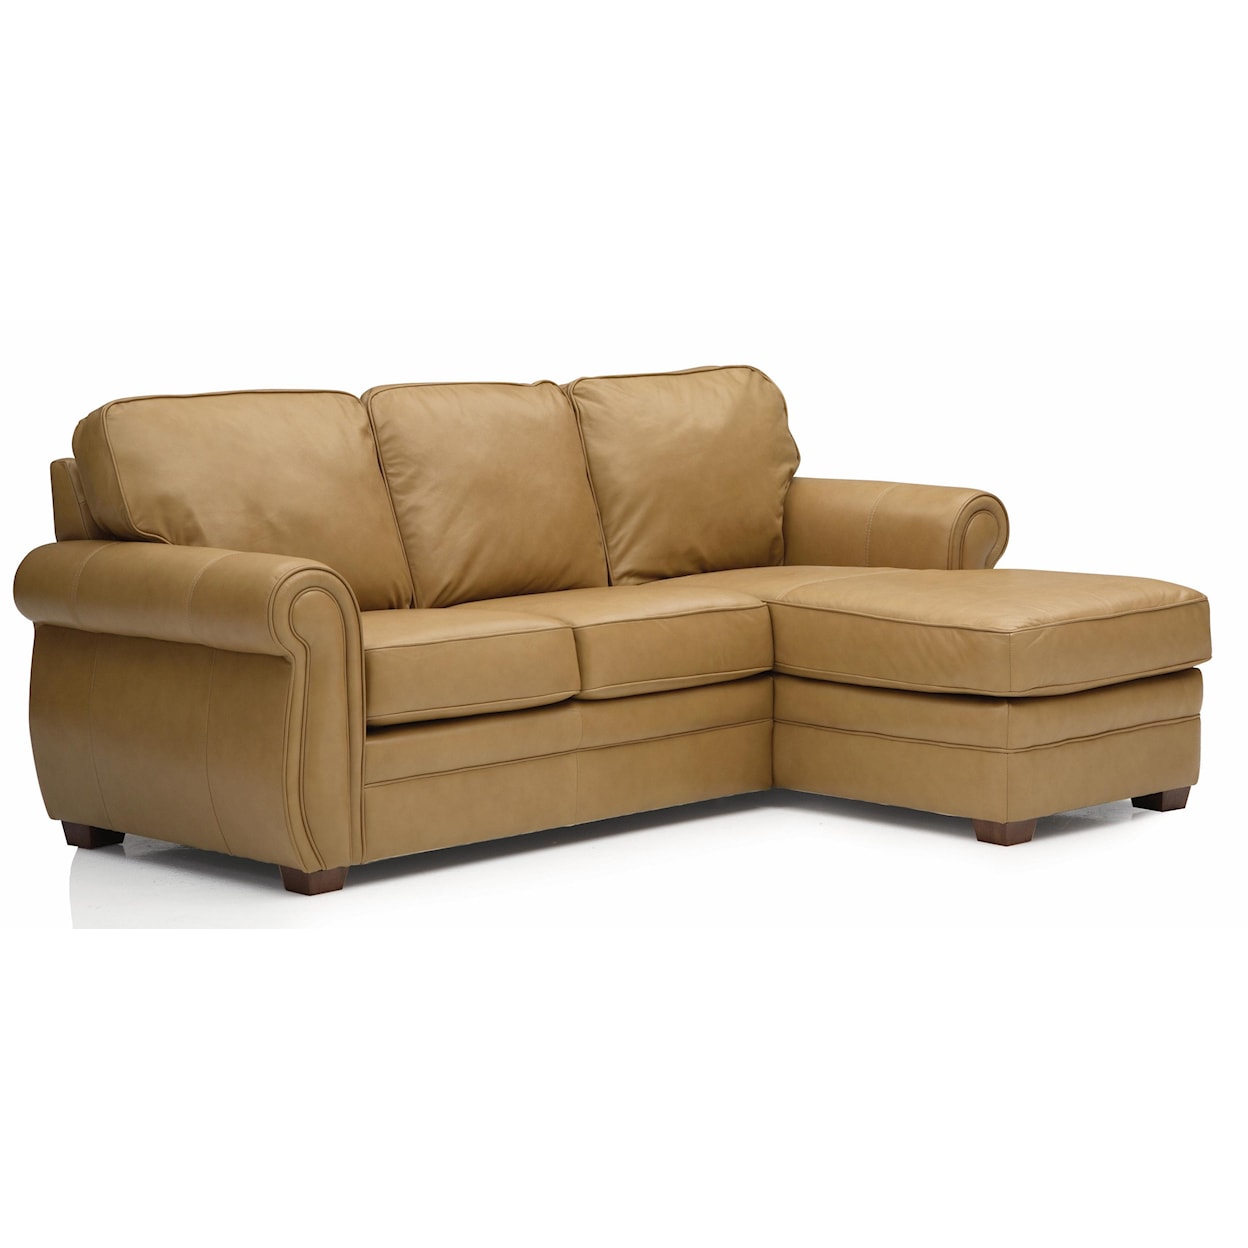 Palliser Viceroy70492 Sectional with Chaise